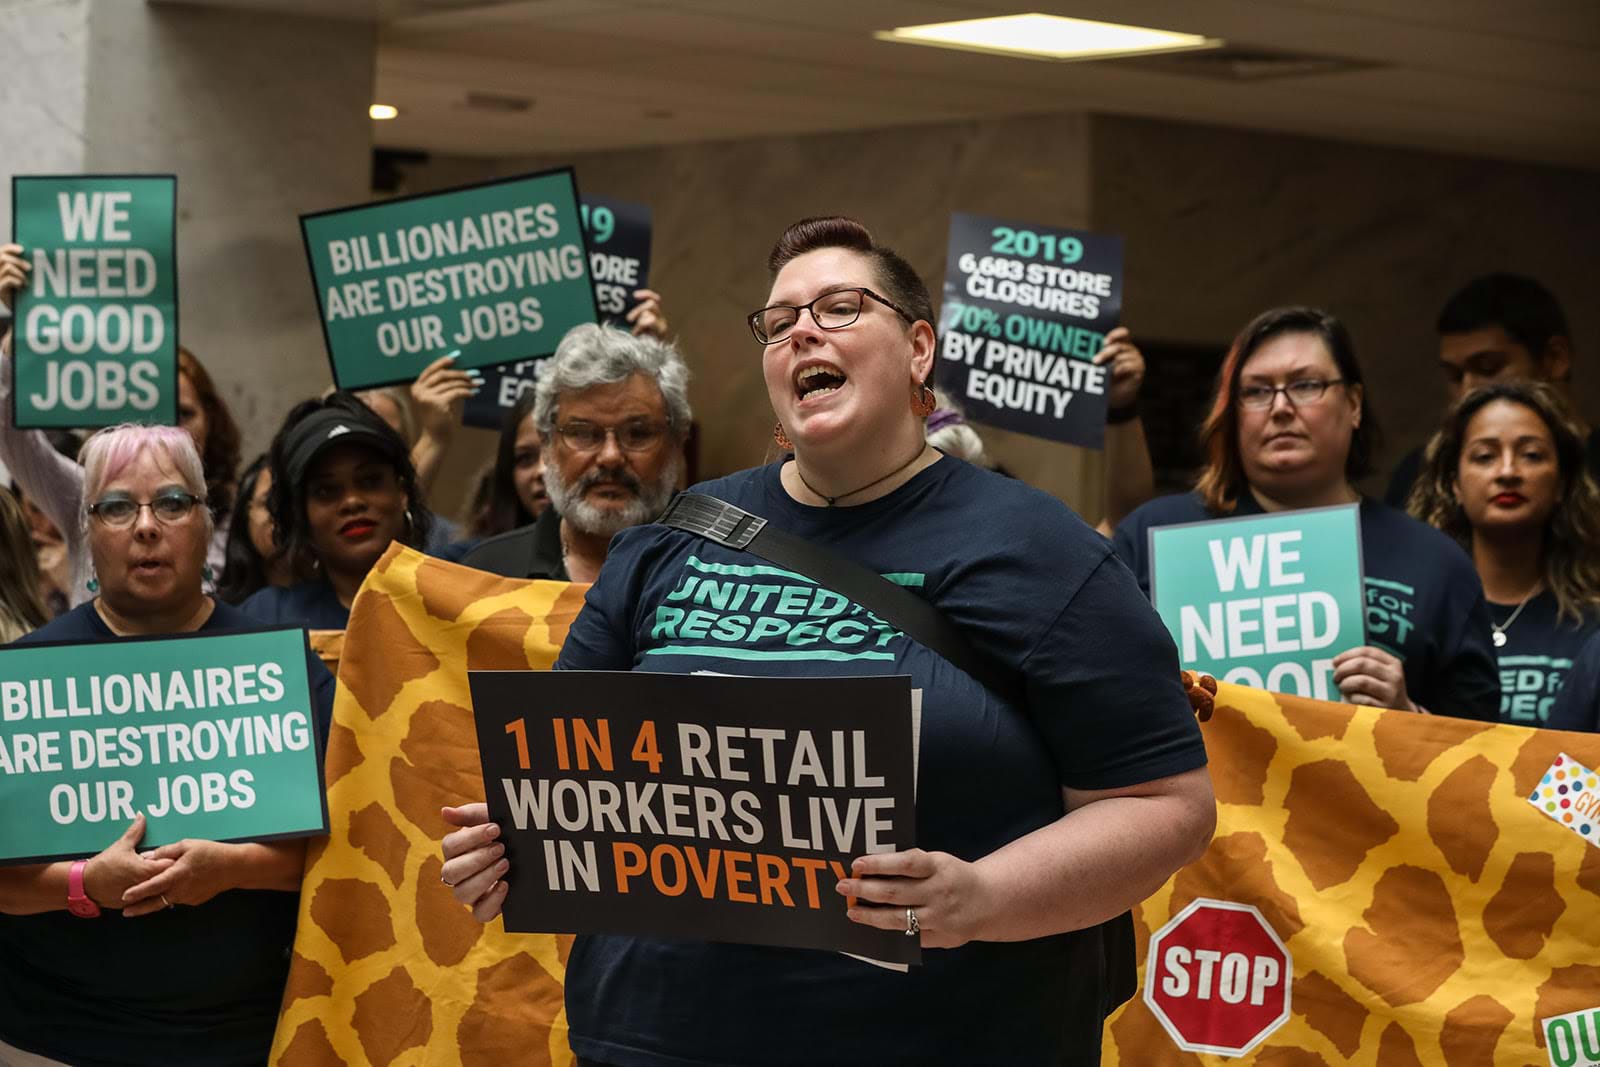 Protestors push Toys "R" Us to prioritize laid-off employees in rehires, rethink the layout of new stores, and institute a $15 minimum wage.